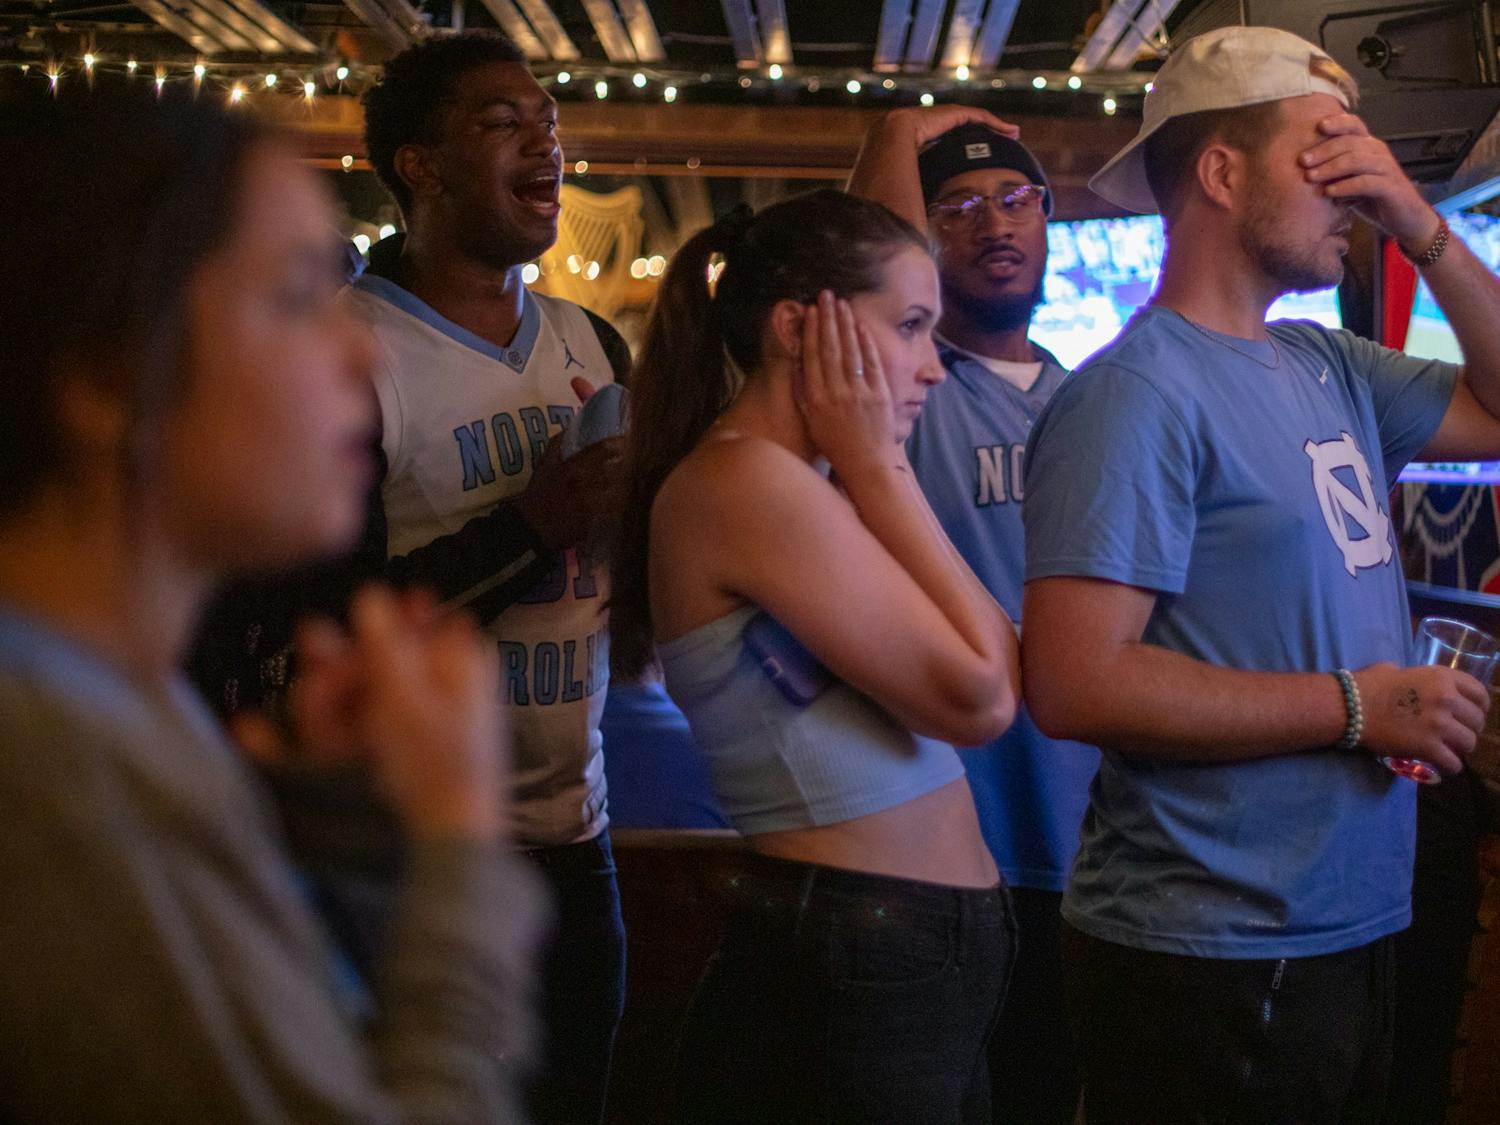 Students react to the NCAA Championship game in Goodfellows on Monday, April 4, 2022. "It was frustrating to go into the second half with such a solid lead and see that go away," said Caroline Perez, a UNC senior wathcing the game at Goodfellows.  "Ultimatley, I am very proud of how our team did given many predicted we were not even going to make the tournament. "